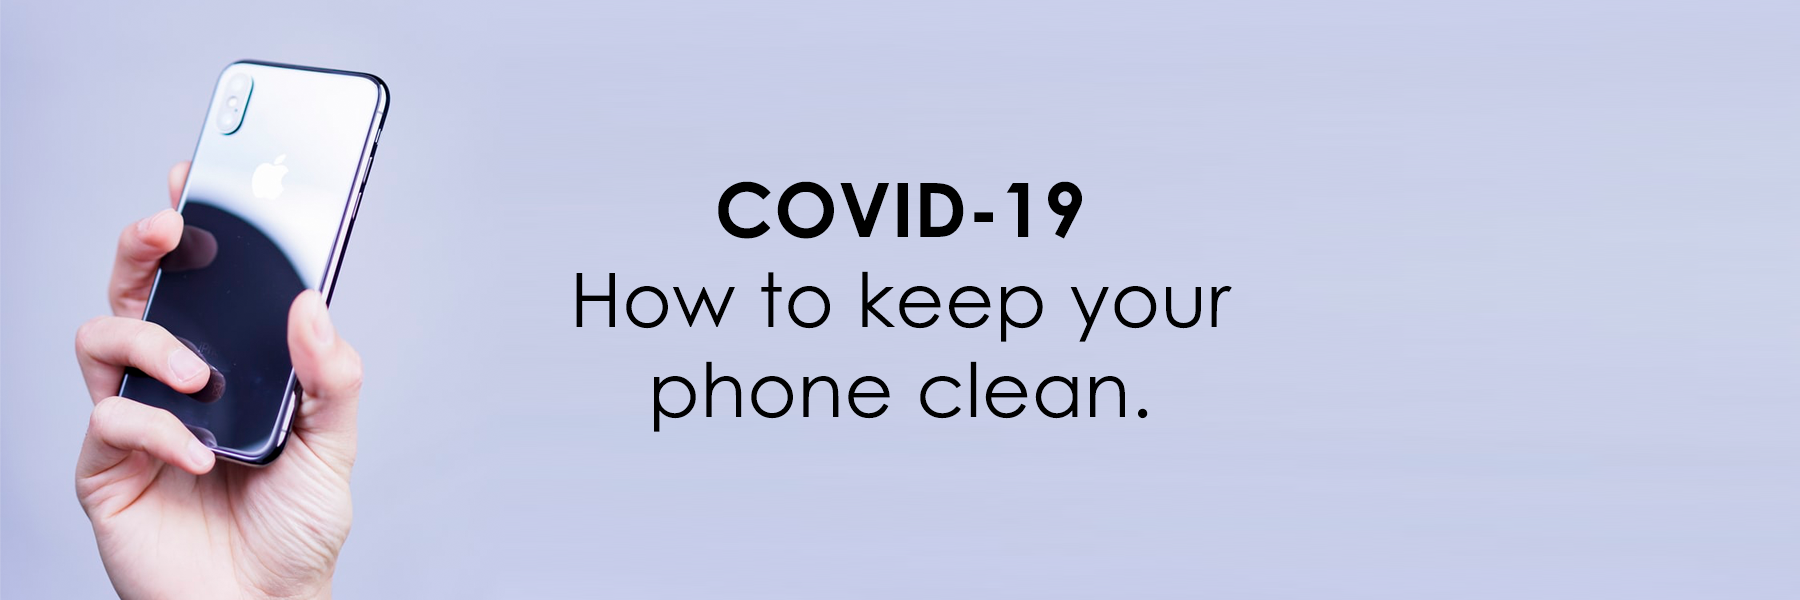 COVID 19: How to keep your phone clean.